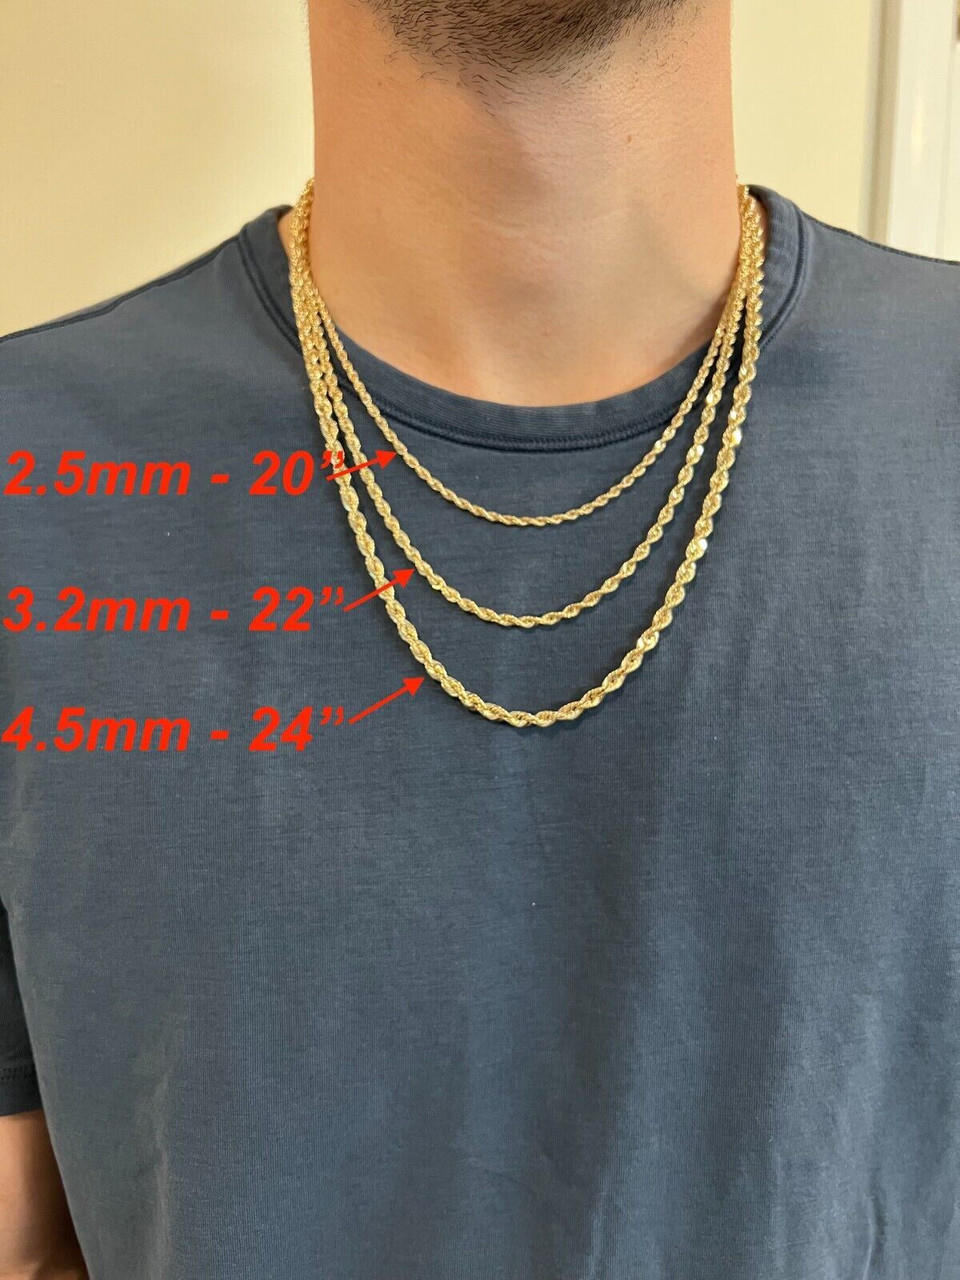 Men's Women's Real 14k Yellow Gold Hollow Rope Chain Necklace 1.5